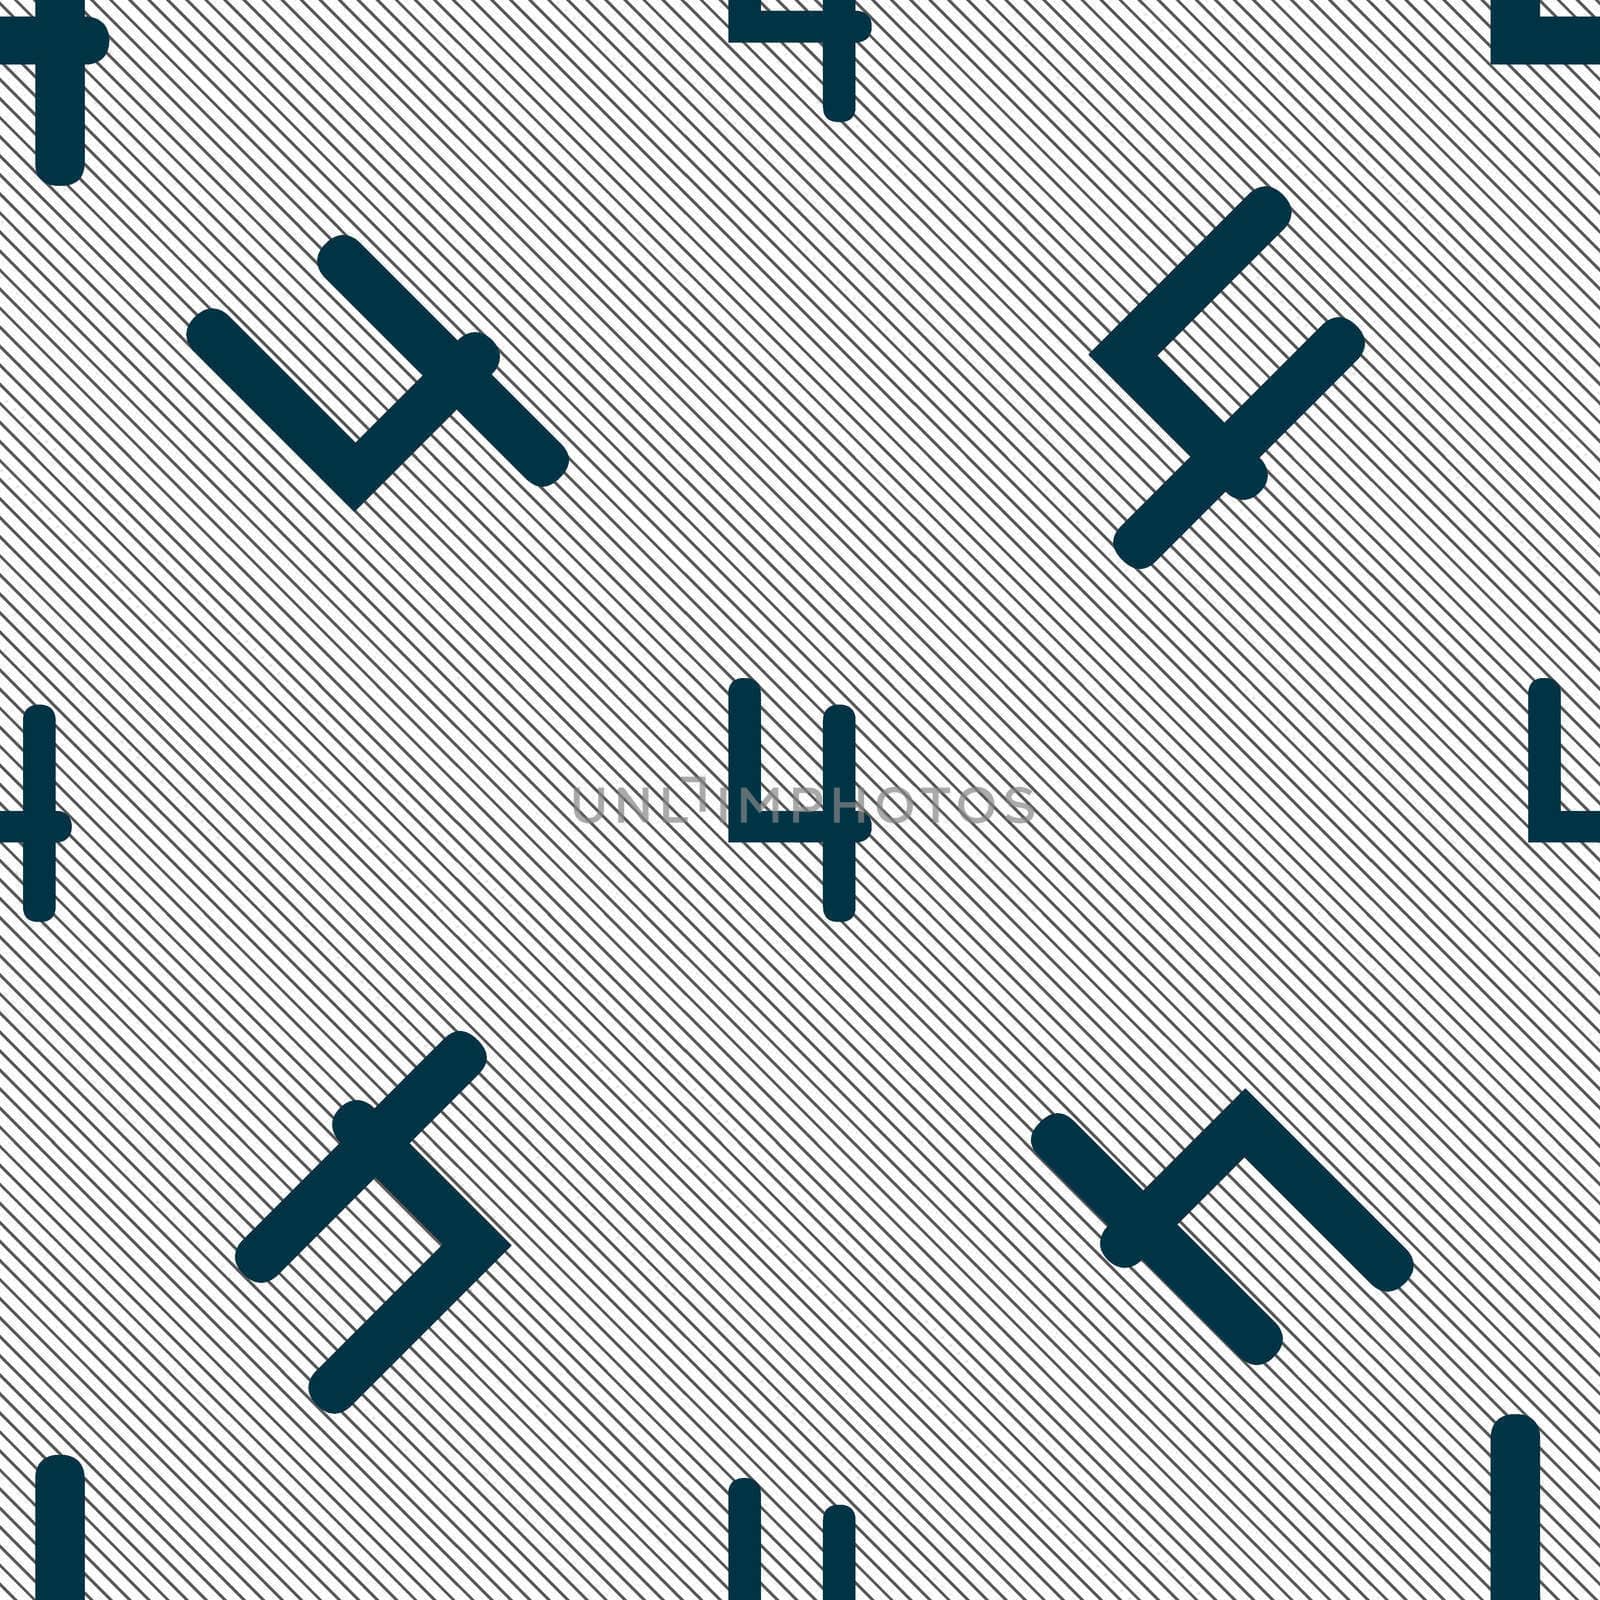 number four icon sign. Seamless pattern with geometric texture.  by serhii_lohvyniuk